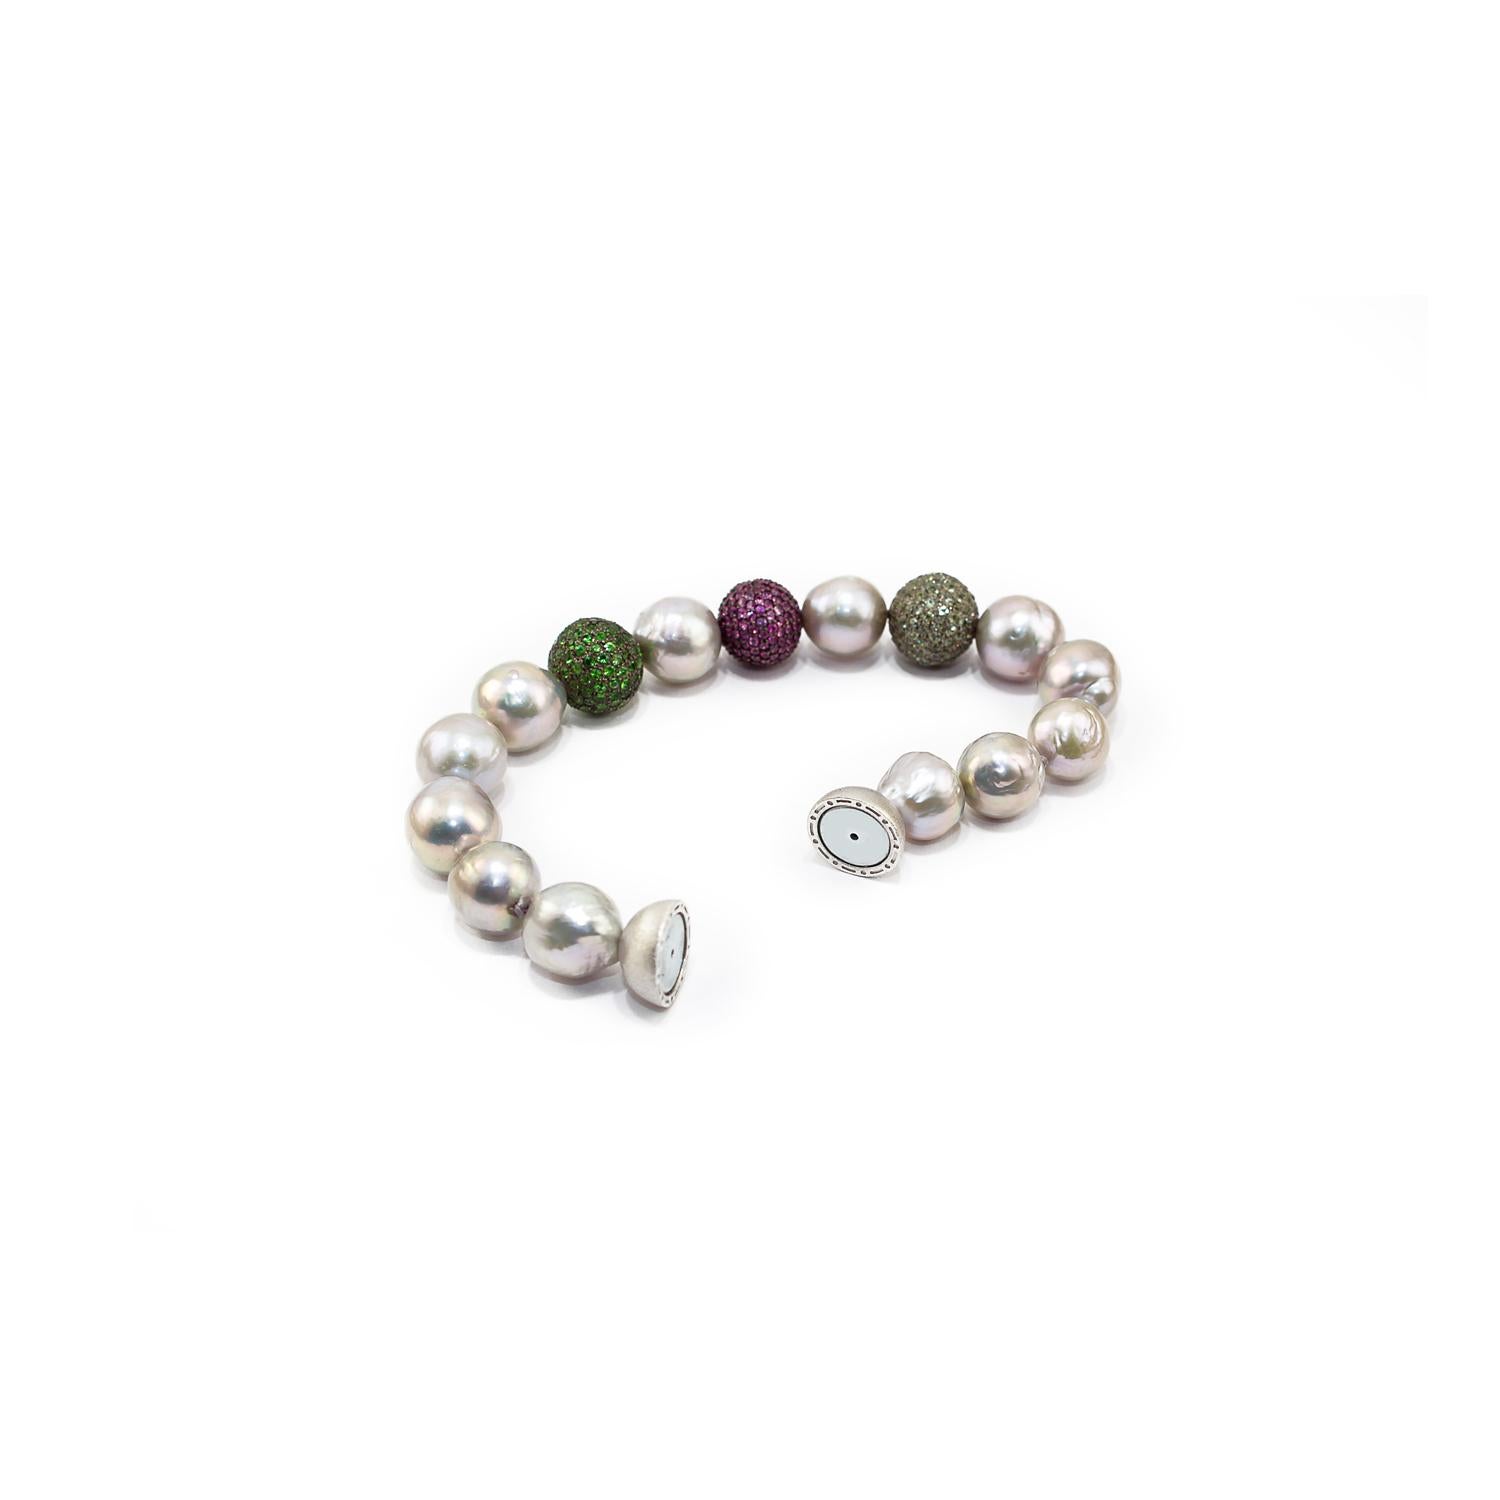 Artisan Green Sapphires, Rubies and Tsavorite Pave, Pearls and Silver Clasp For Sale